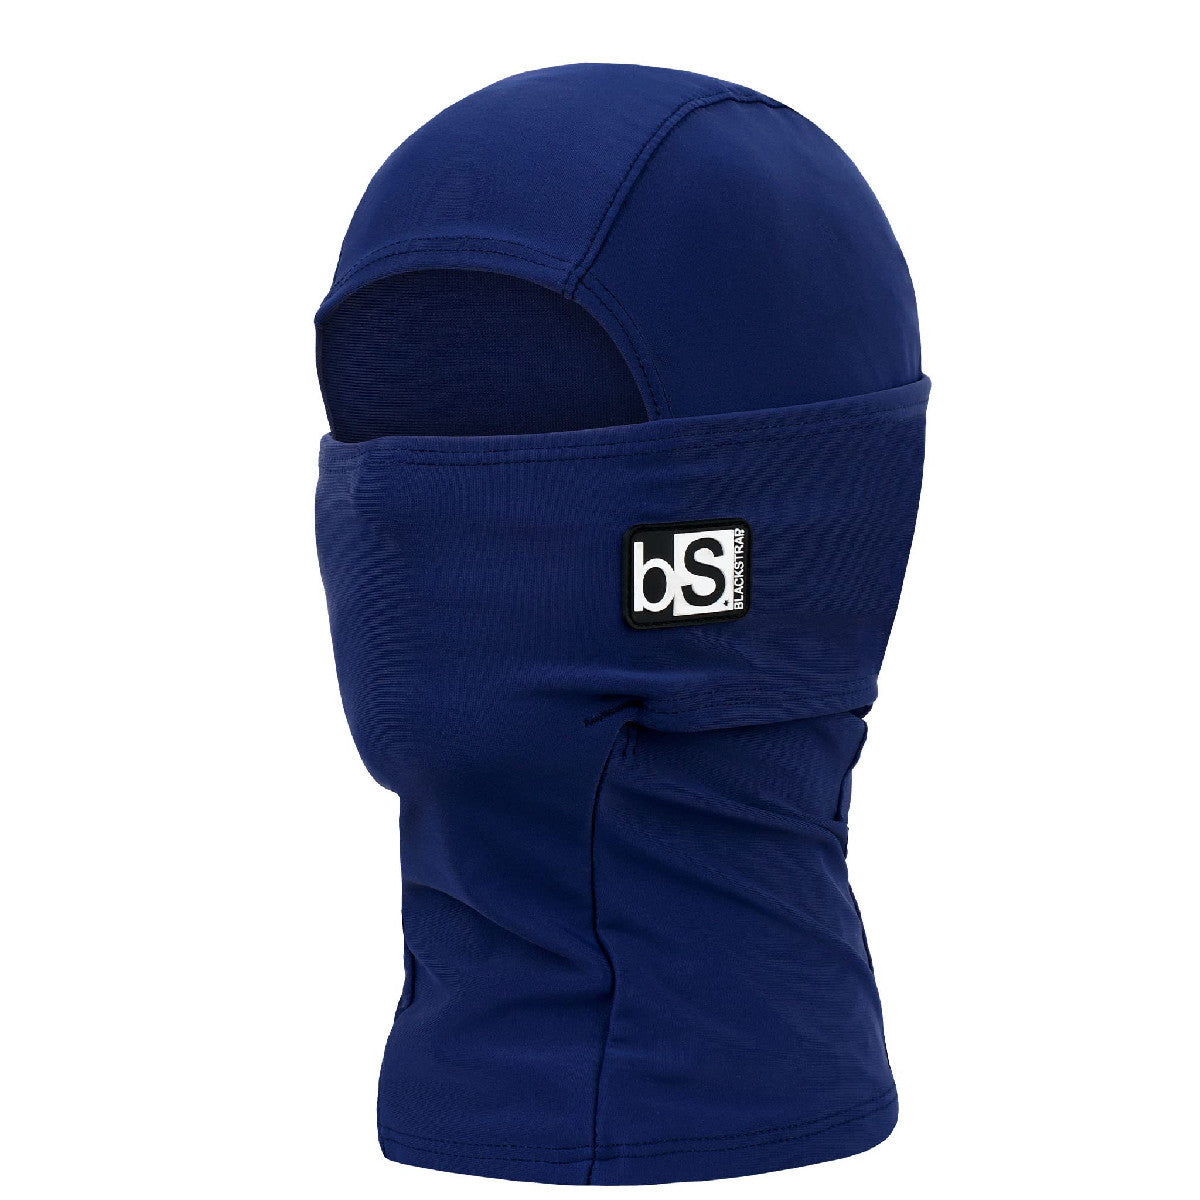 Blackstrap Youth Hood Turquoise OS Neck Warmers & Face Masks